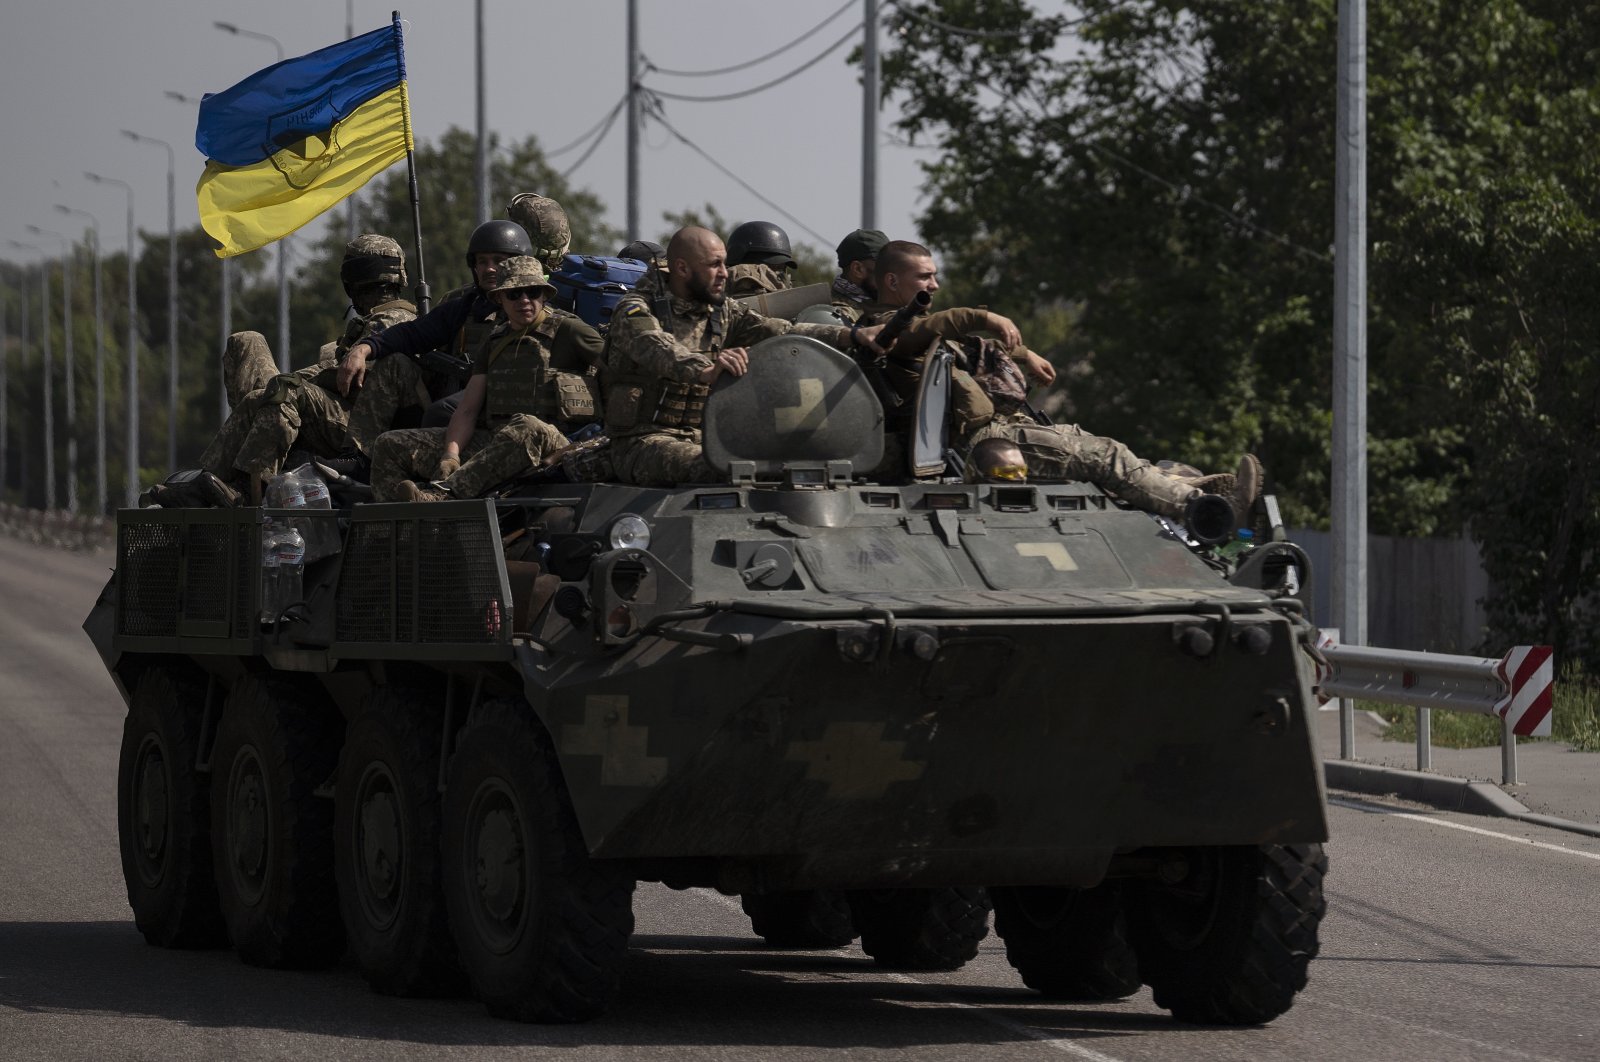 Ukrainian soldiers ride atop an armored vehicle on a road in Donetsk region, eastern Ukraine, Aug. 28, 2022. (AP File Photo)